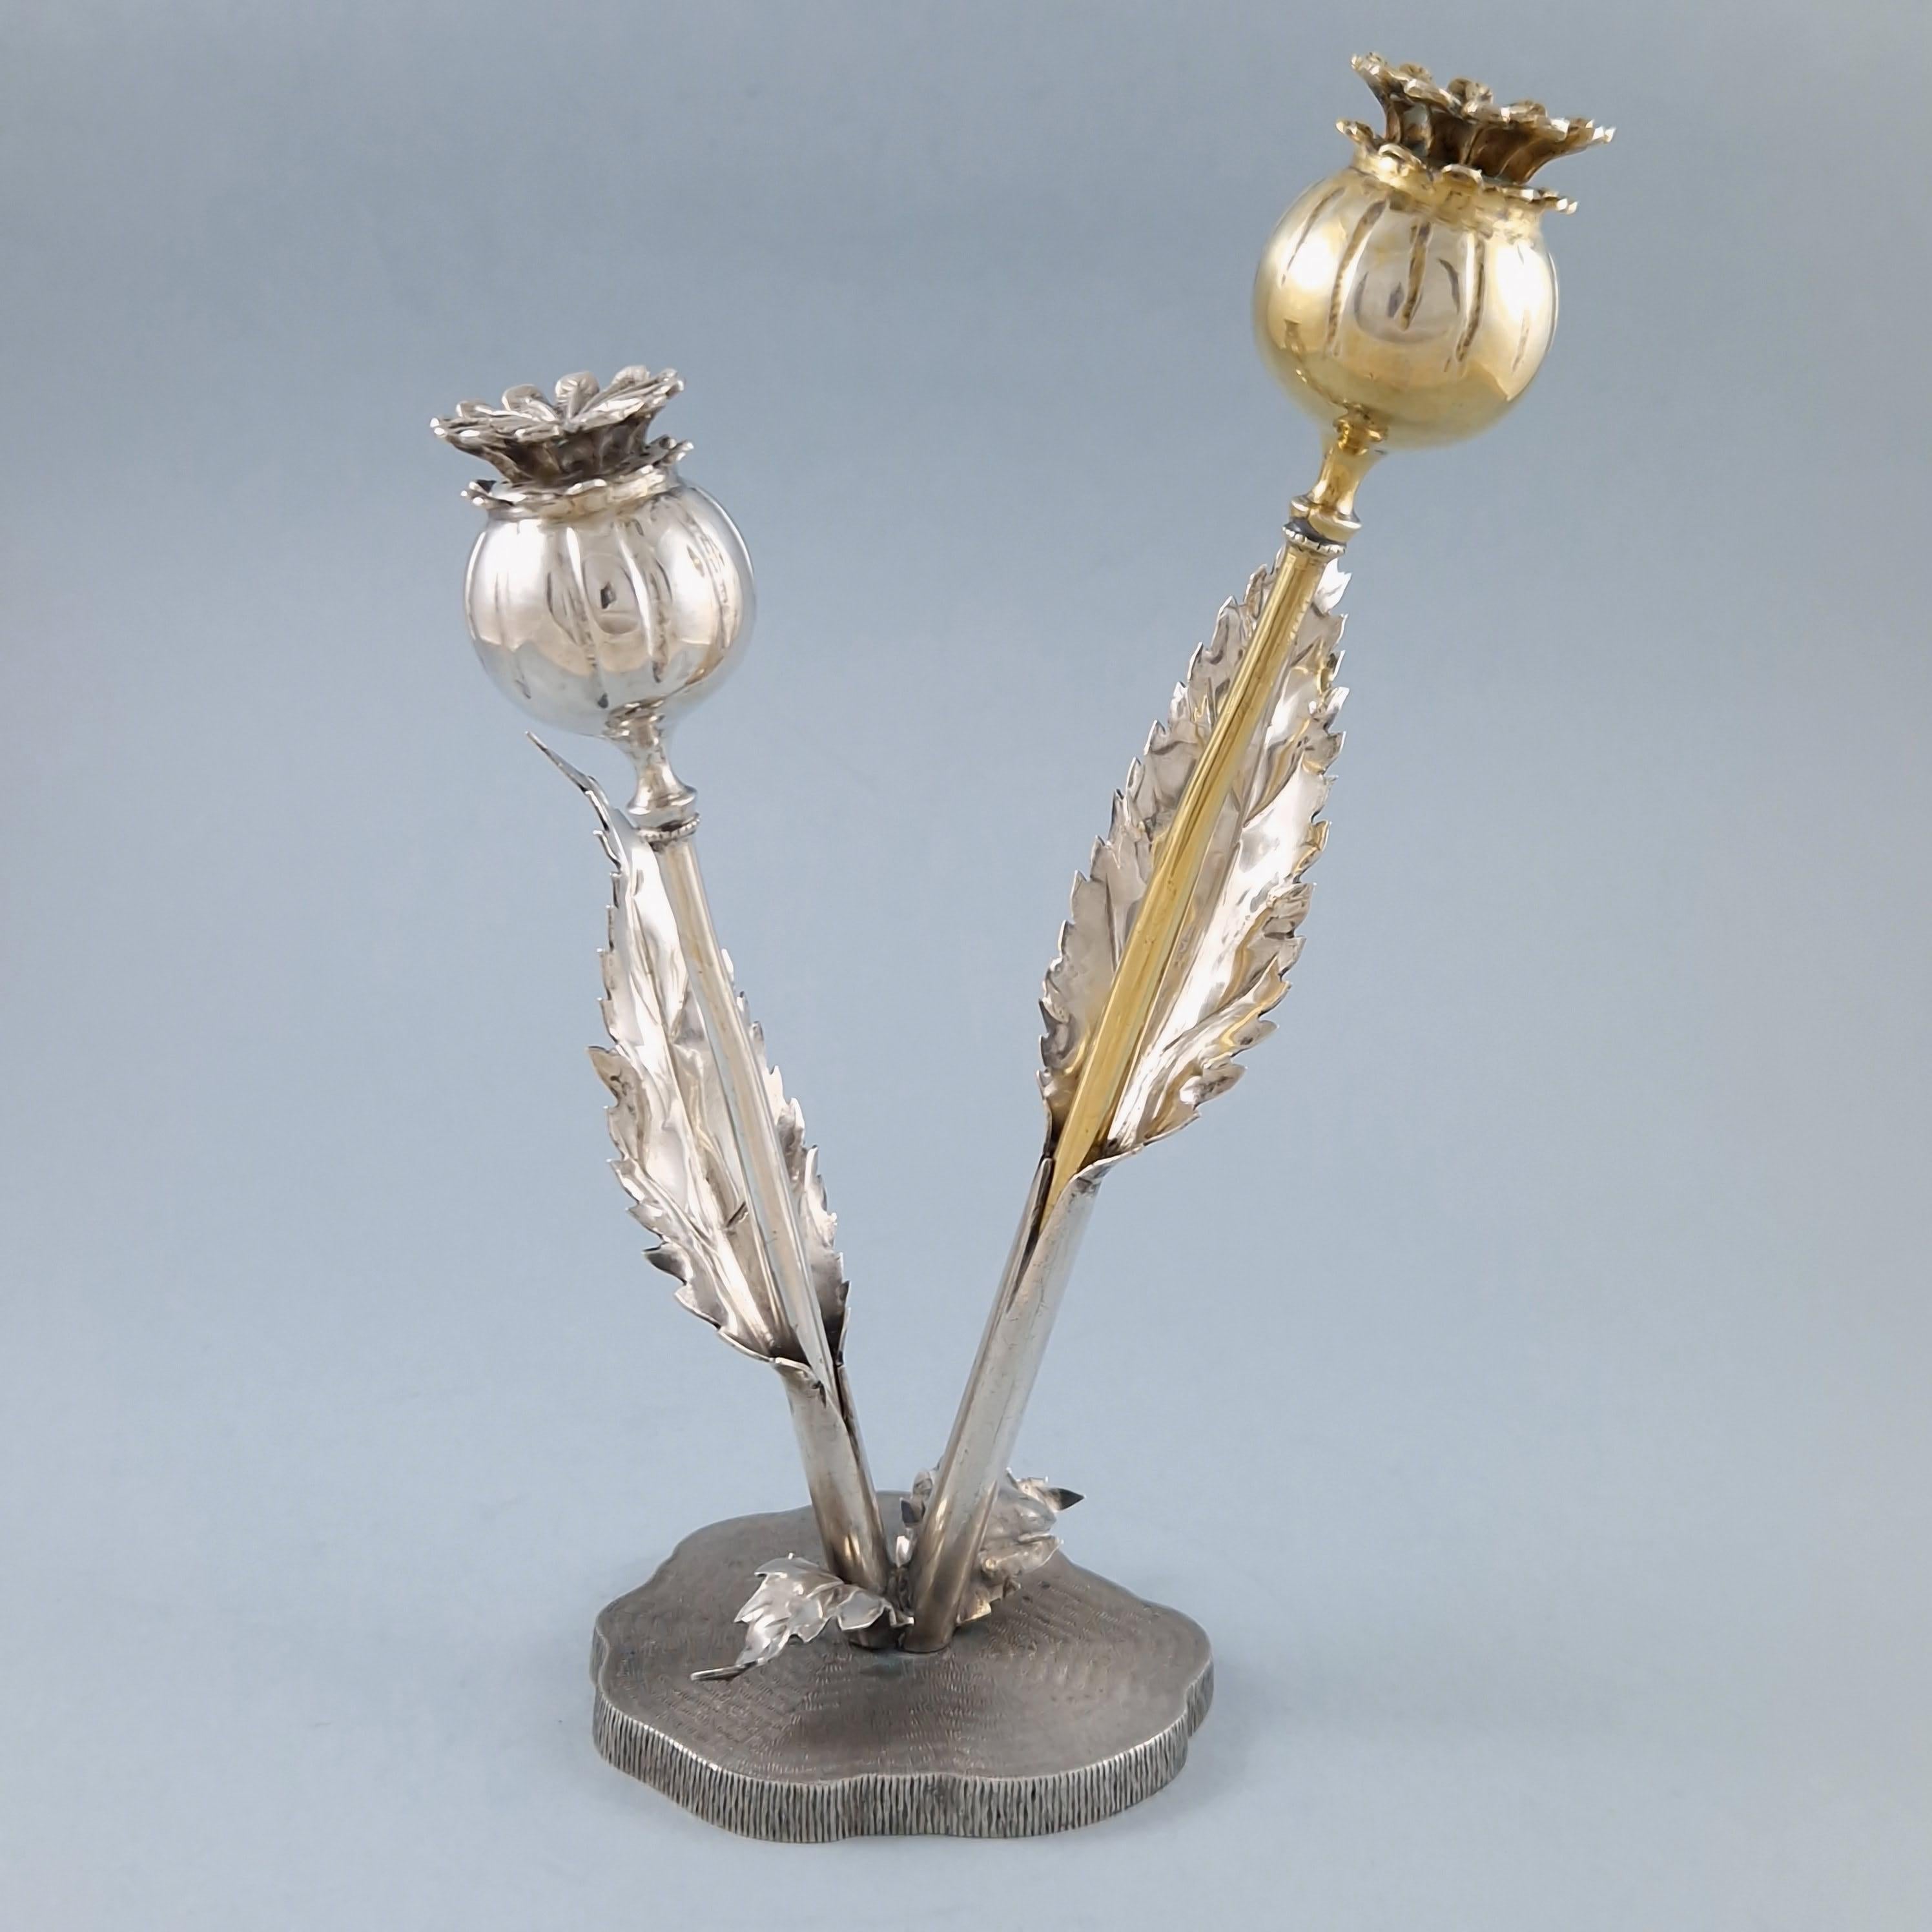 This late 20th century salt and pepper shaker set, designed to look like a poppy plant sprouting from the base, was produced by Buccellat

The poppy pods hold the salt and pepper and detach for use

800 silver hallmark
Measures: Height: